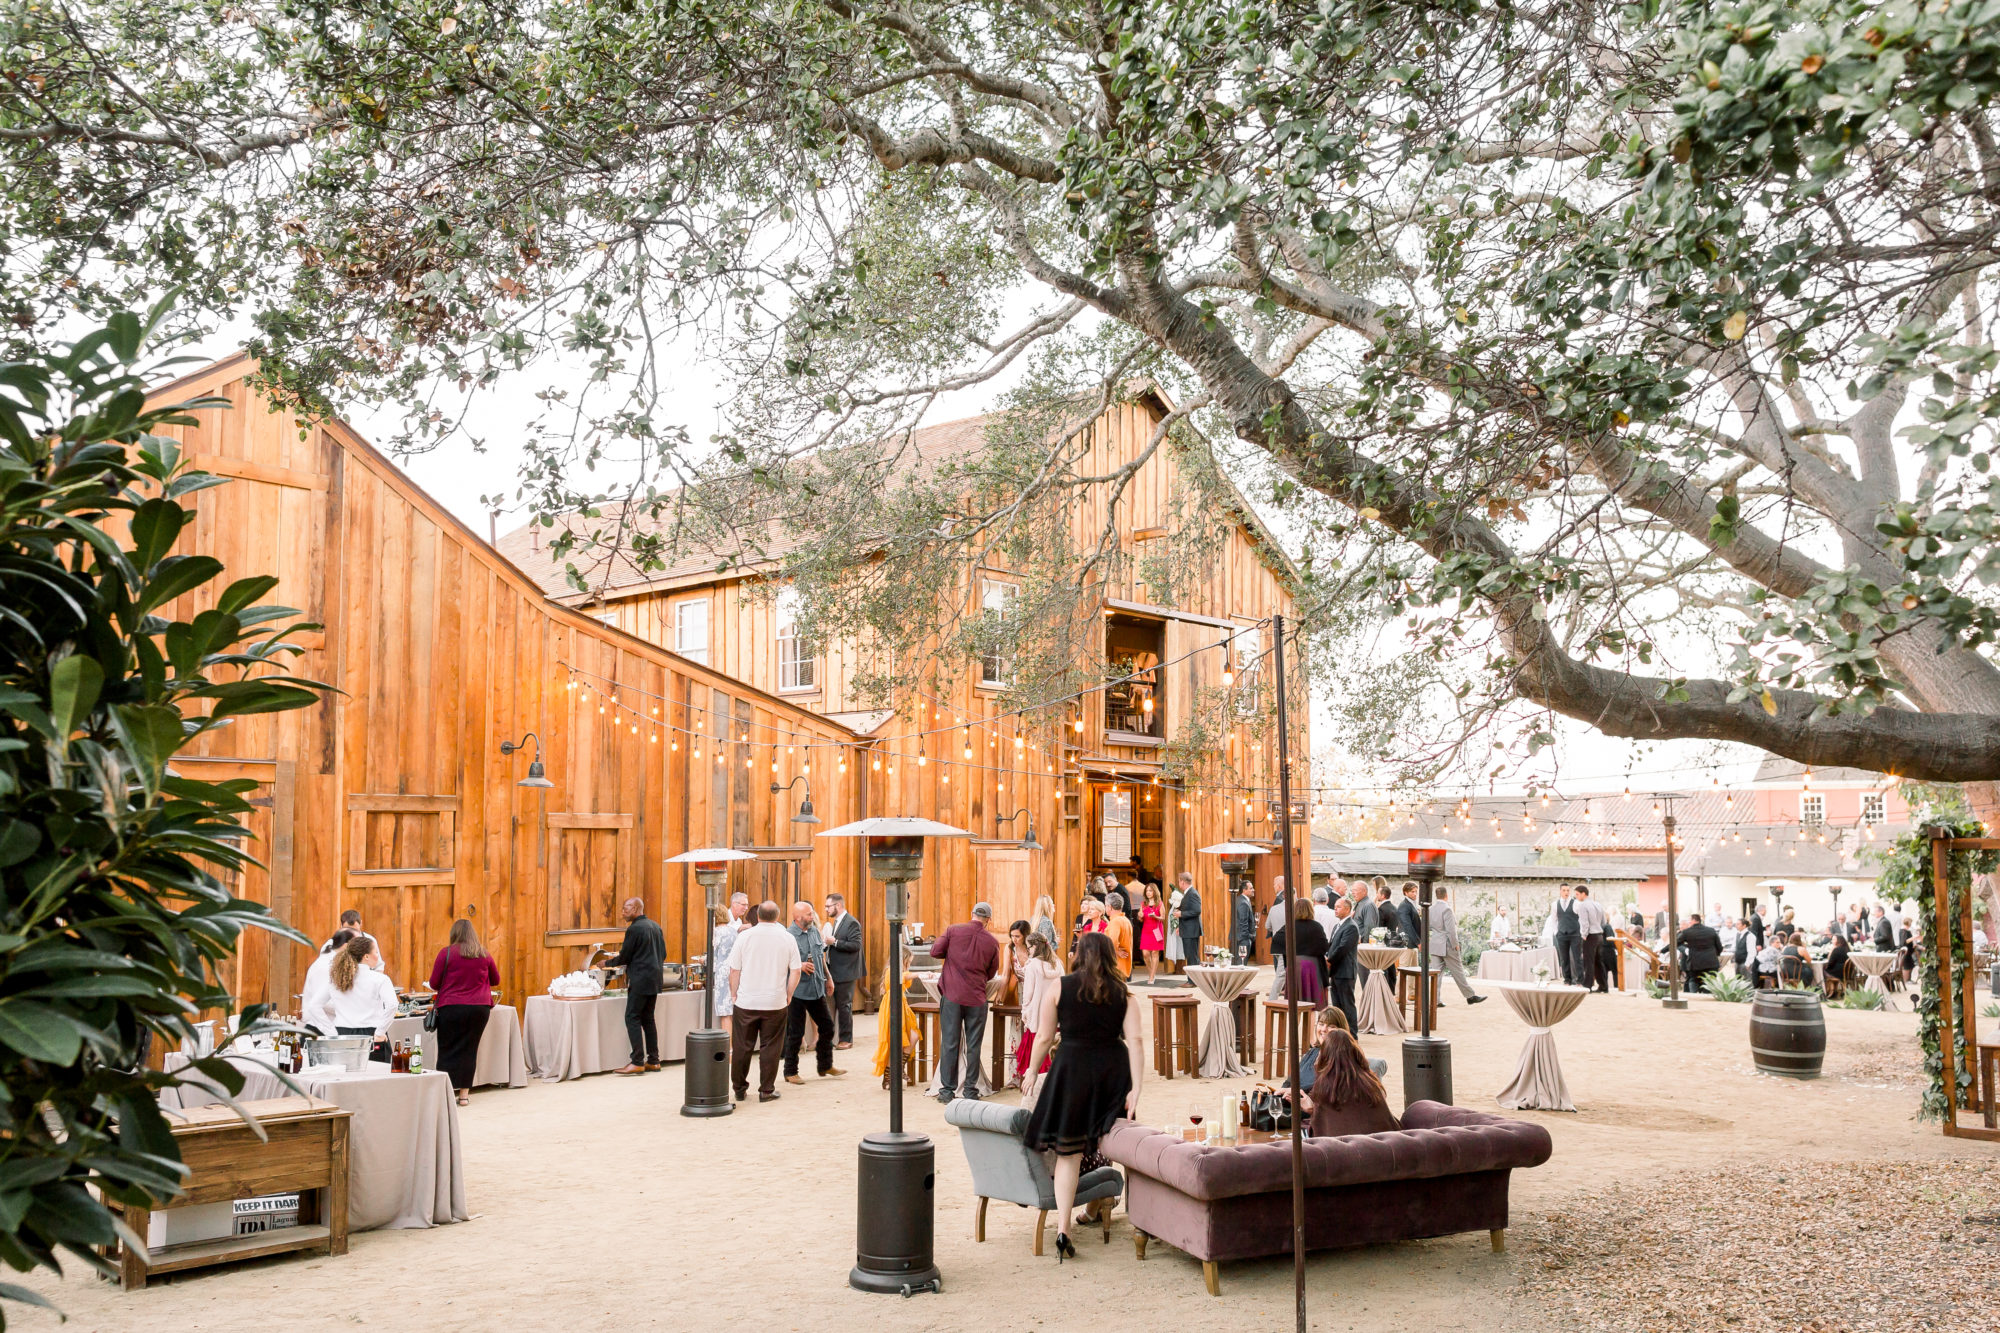 Guests Mingling during Cocktail Hour at Monterey Barns